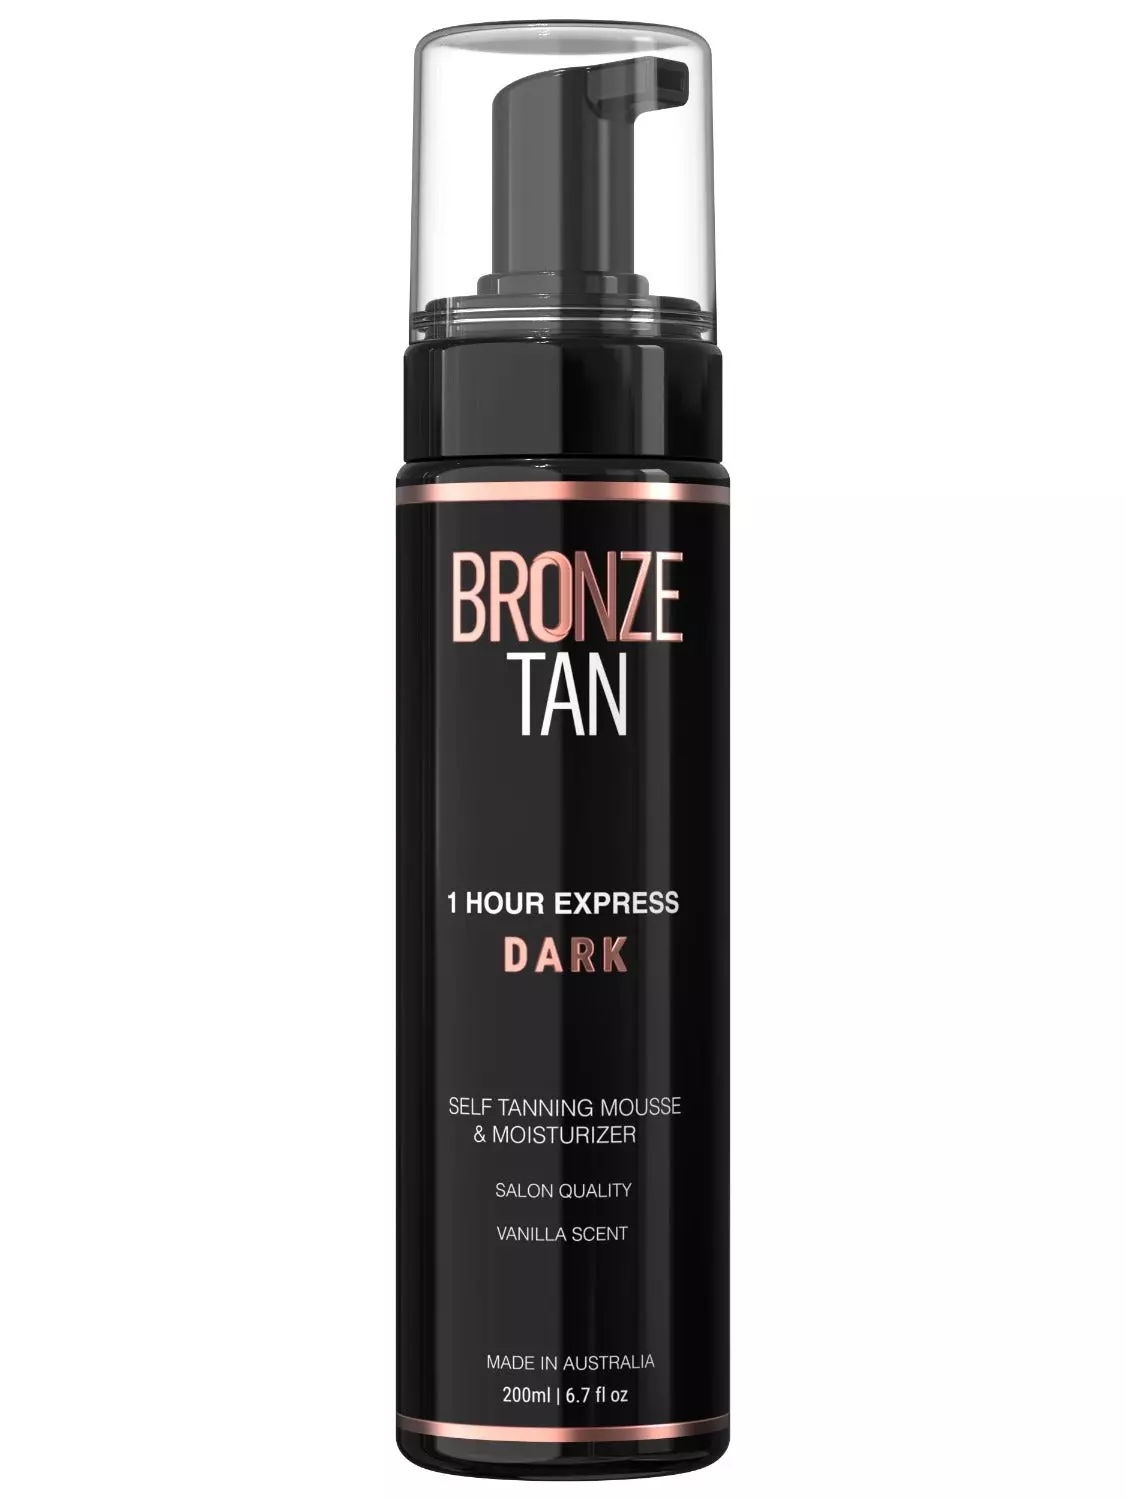 Bronze Tan Self Tanning Mousse (Dark) With Natural Ingredients | Self Tanner For All Skin Tones | Salon Quality Vanilla Scented Fake Tan Foam (200 ml/ 6.7 oz)